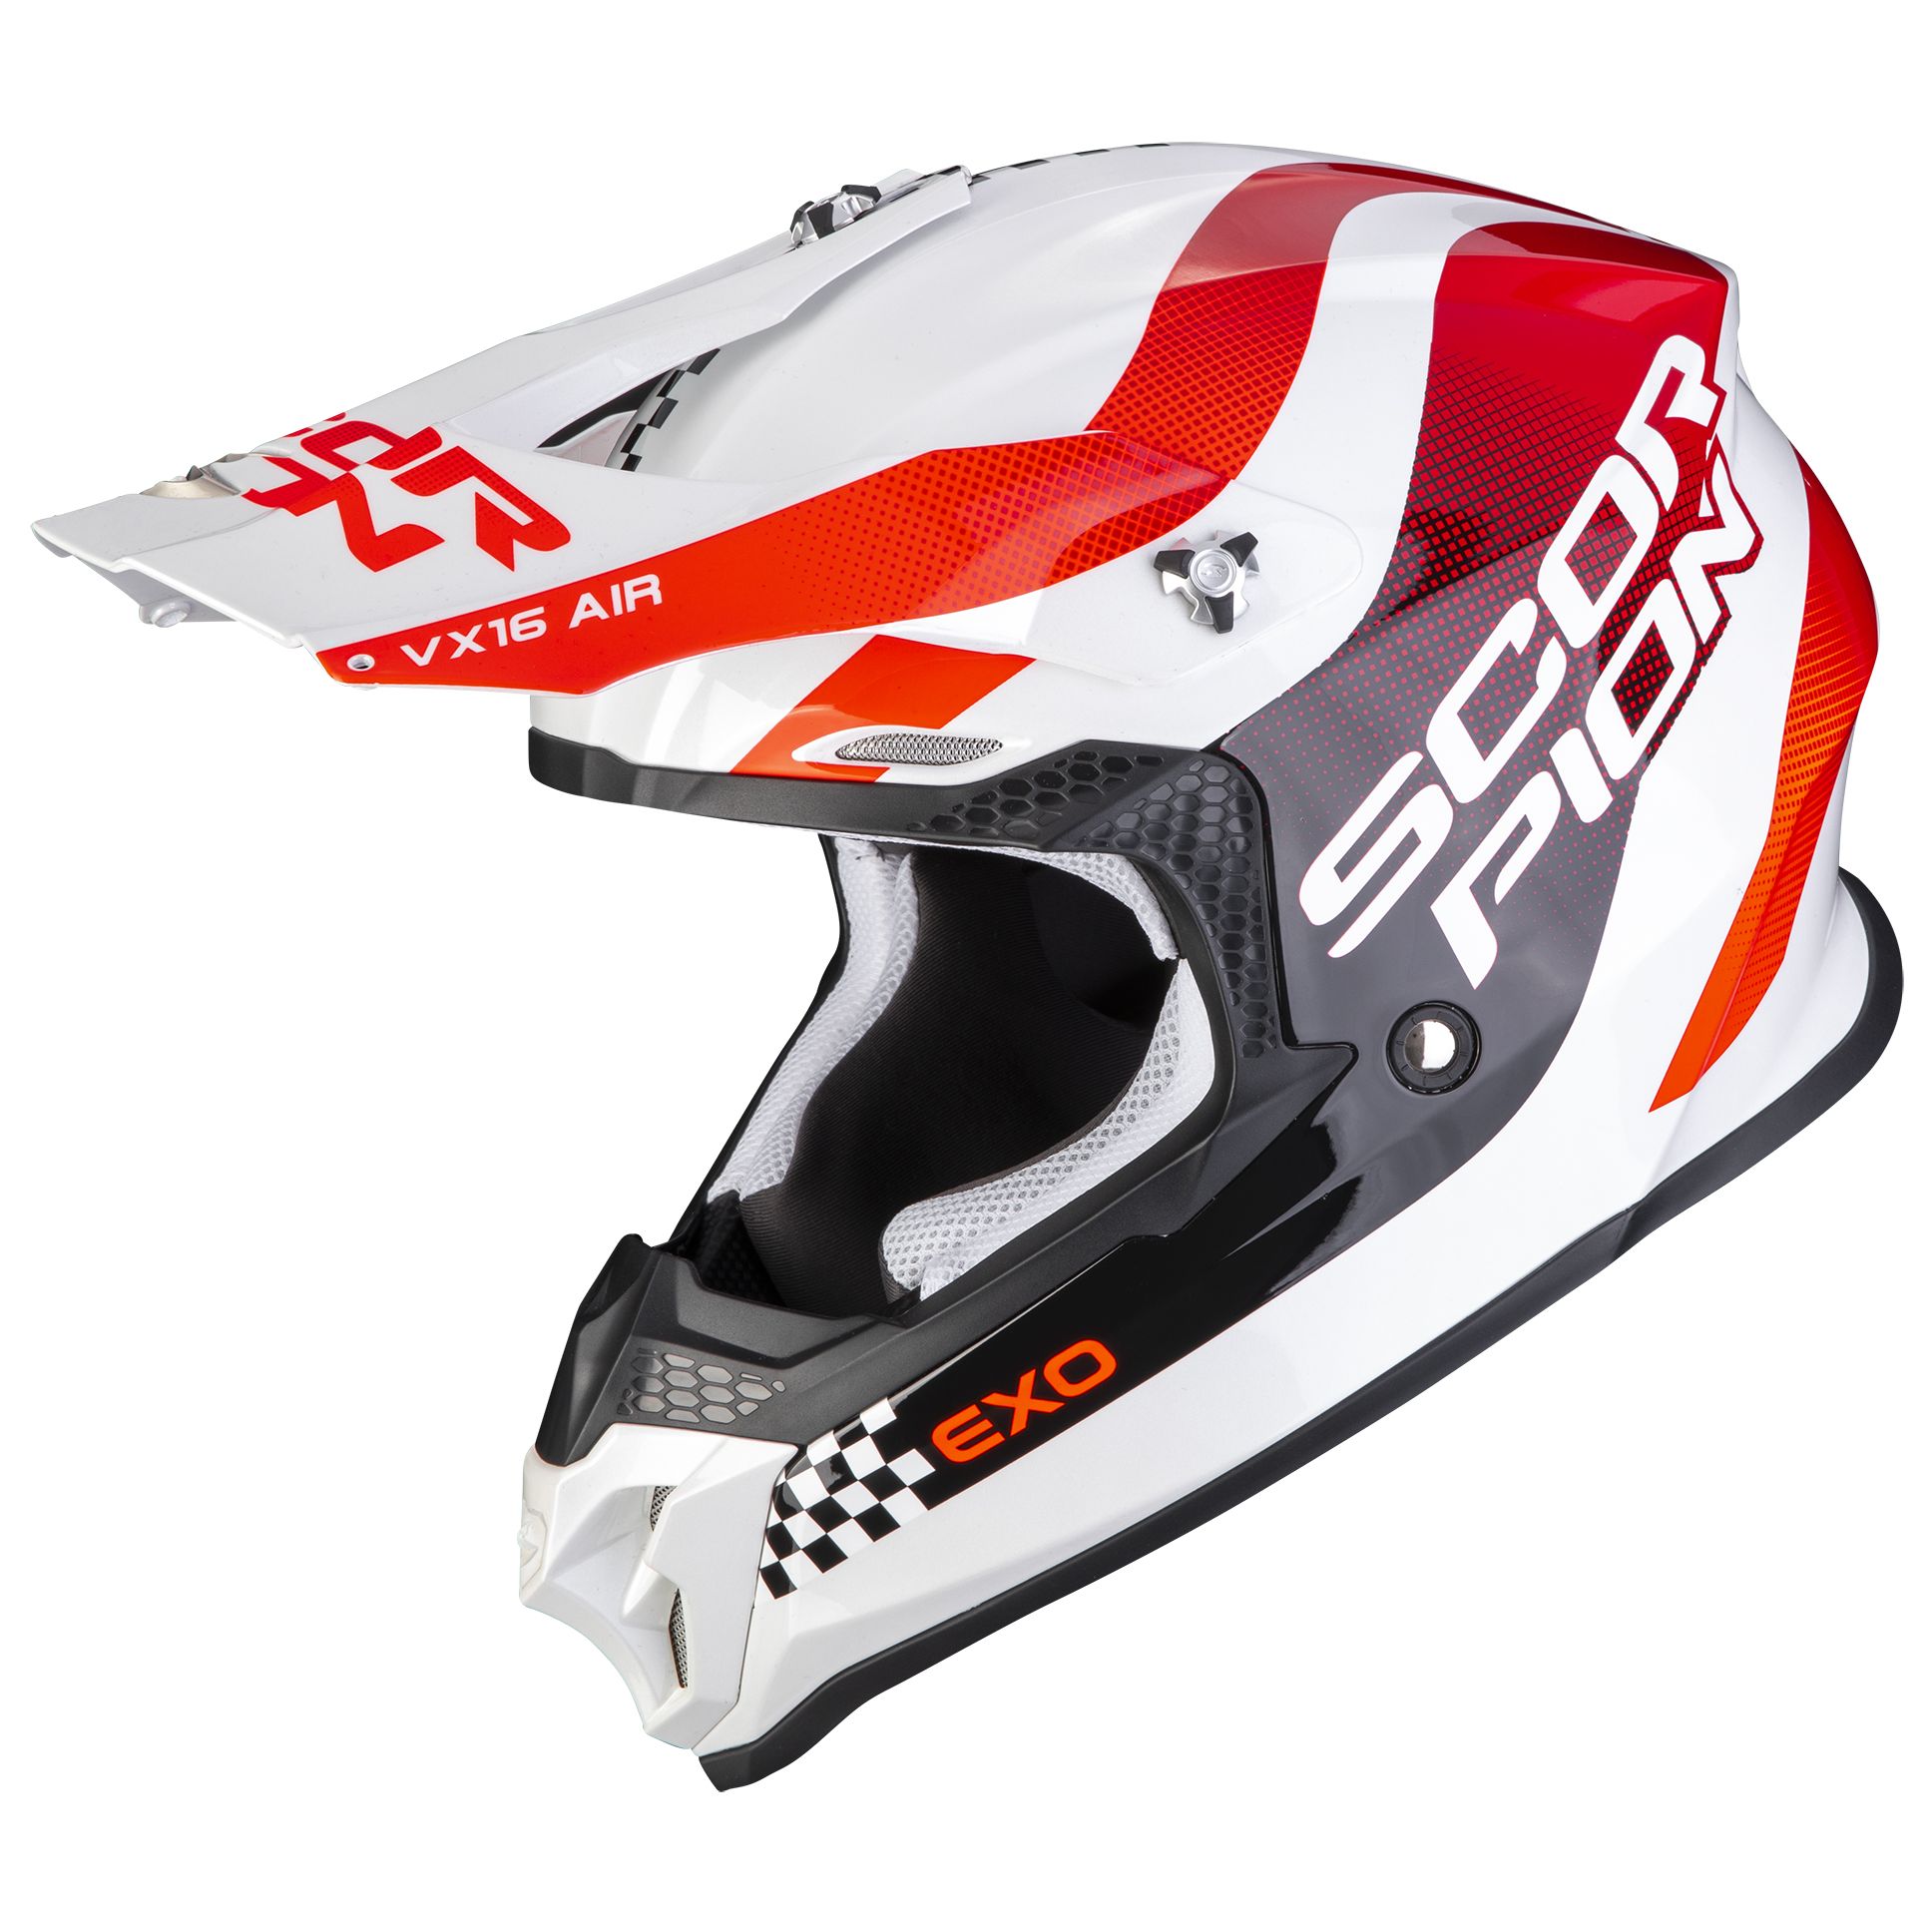 Image of Casque cross Scorpion Exo VX-16 AIR - SOUL - WHITE RED 2022